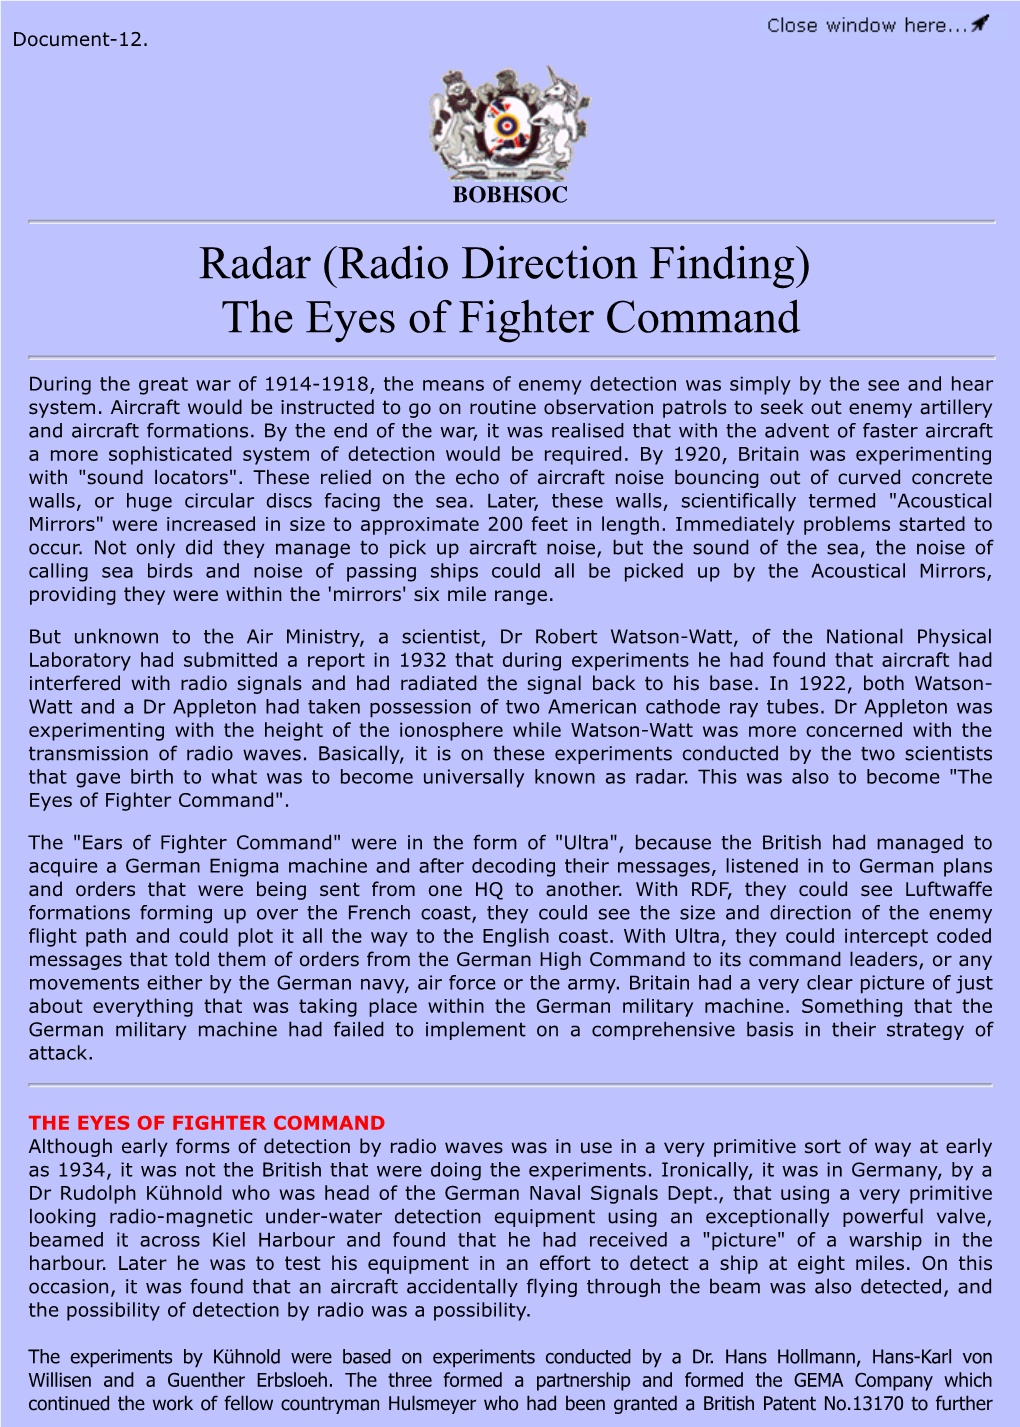 Radar (Radio Direction Finding) the Eyes of Fighter Command